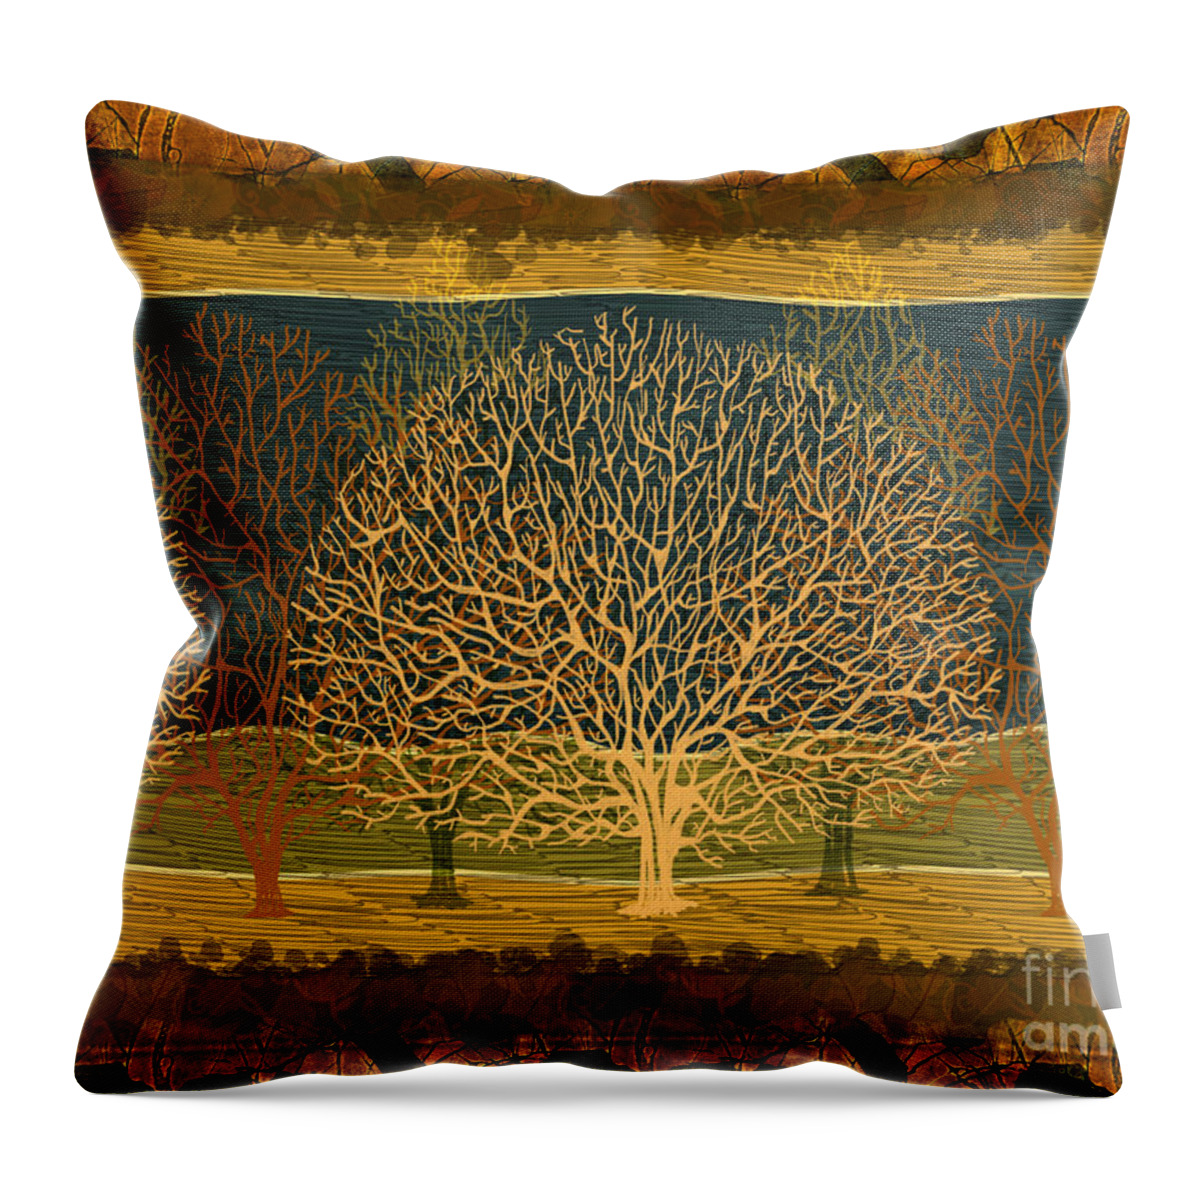 Spring Throw Pillow featuring the digital art Waiting For Spring by Peter Awax